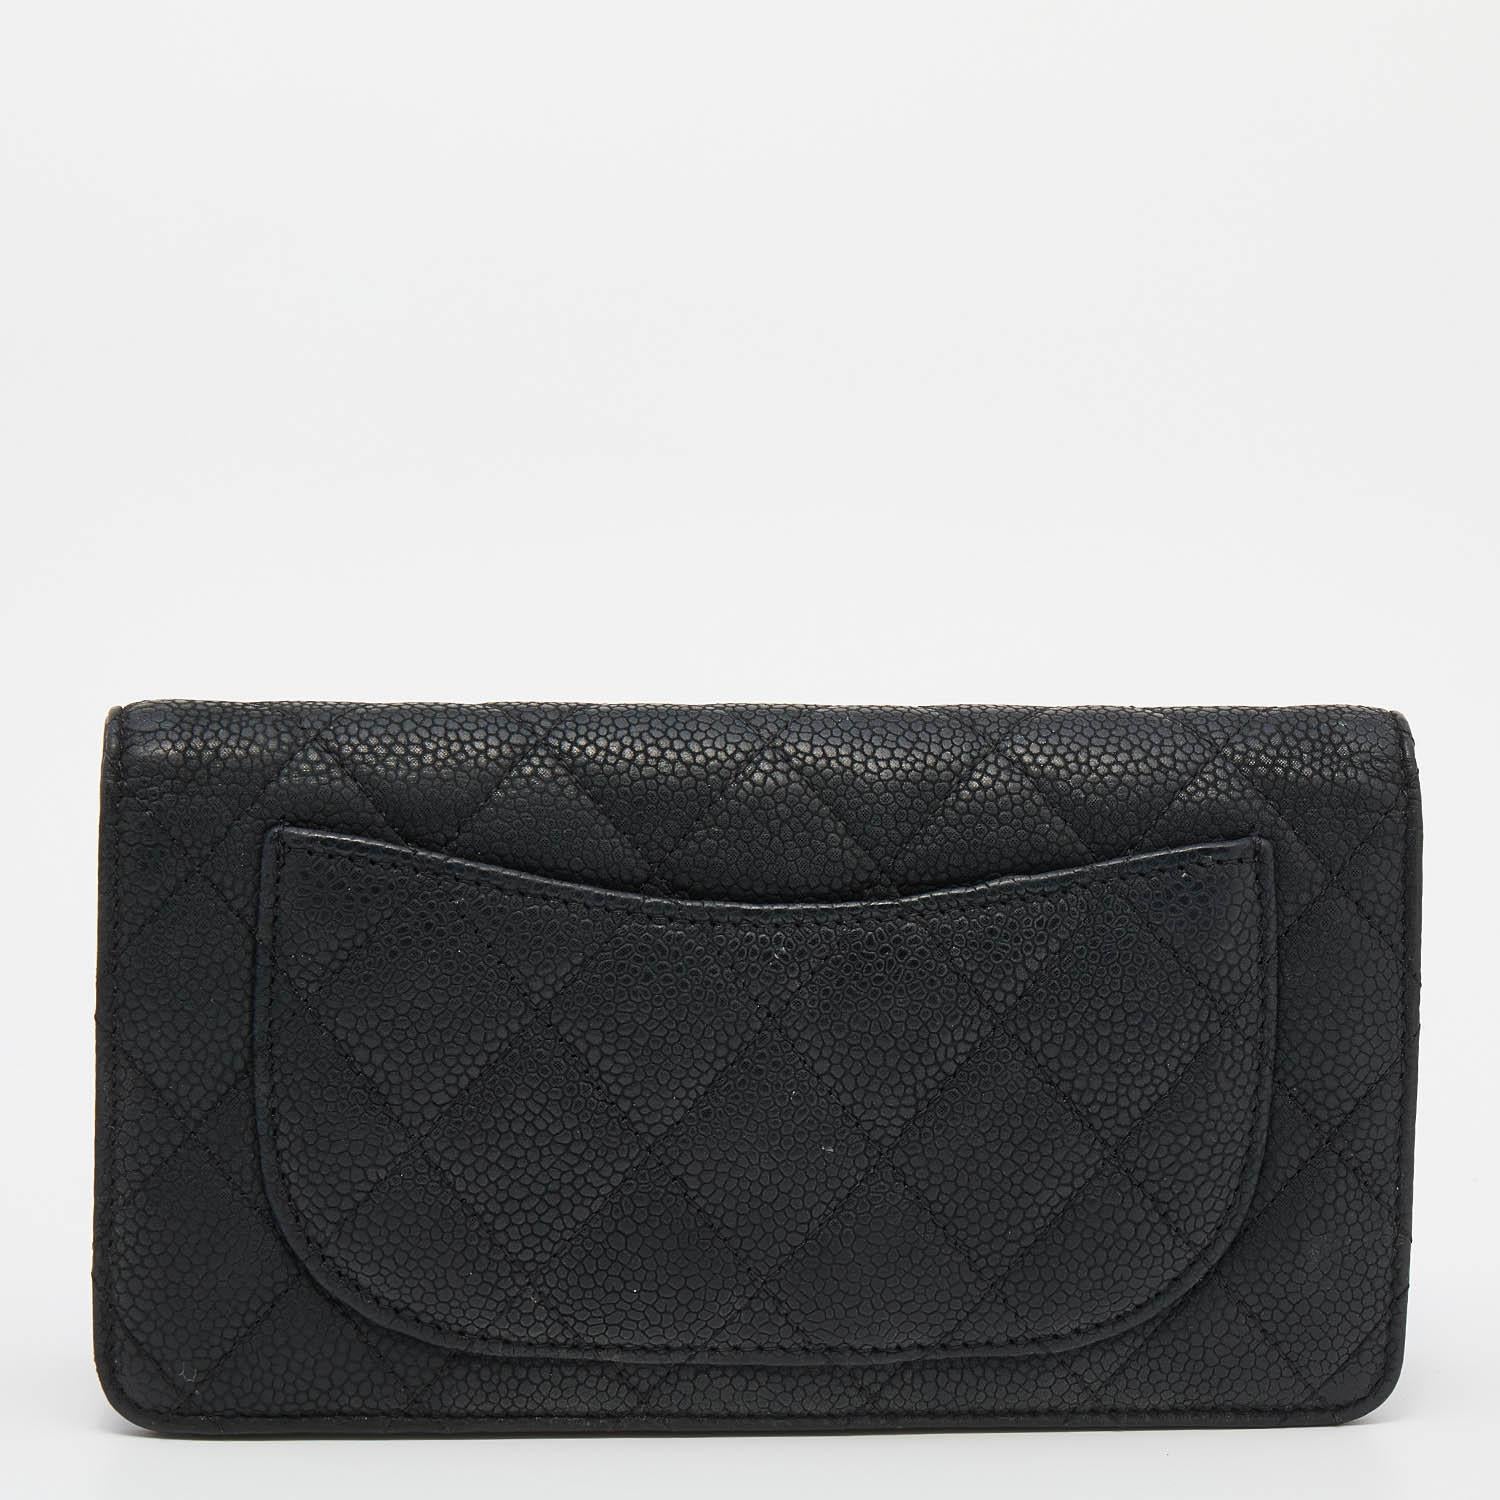 This Yen wallet from Chanel is a wonderful creation! It has been designed using black quilted leather, with a dainty silver-toned CC accent placed on the front. This continental-style wallet unveils a leather-fabric interior, perfectly organized to